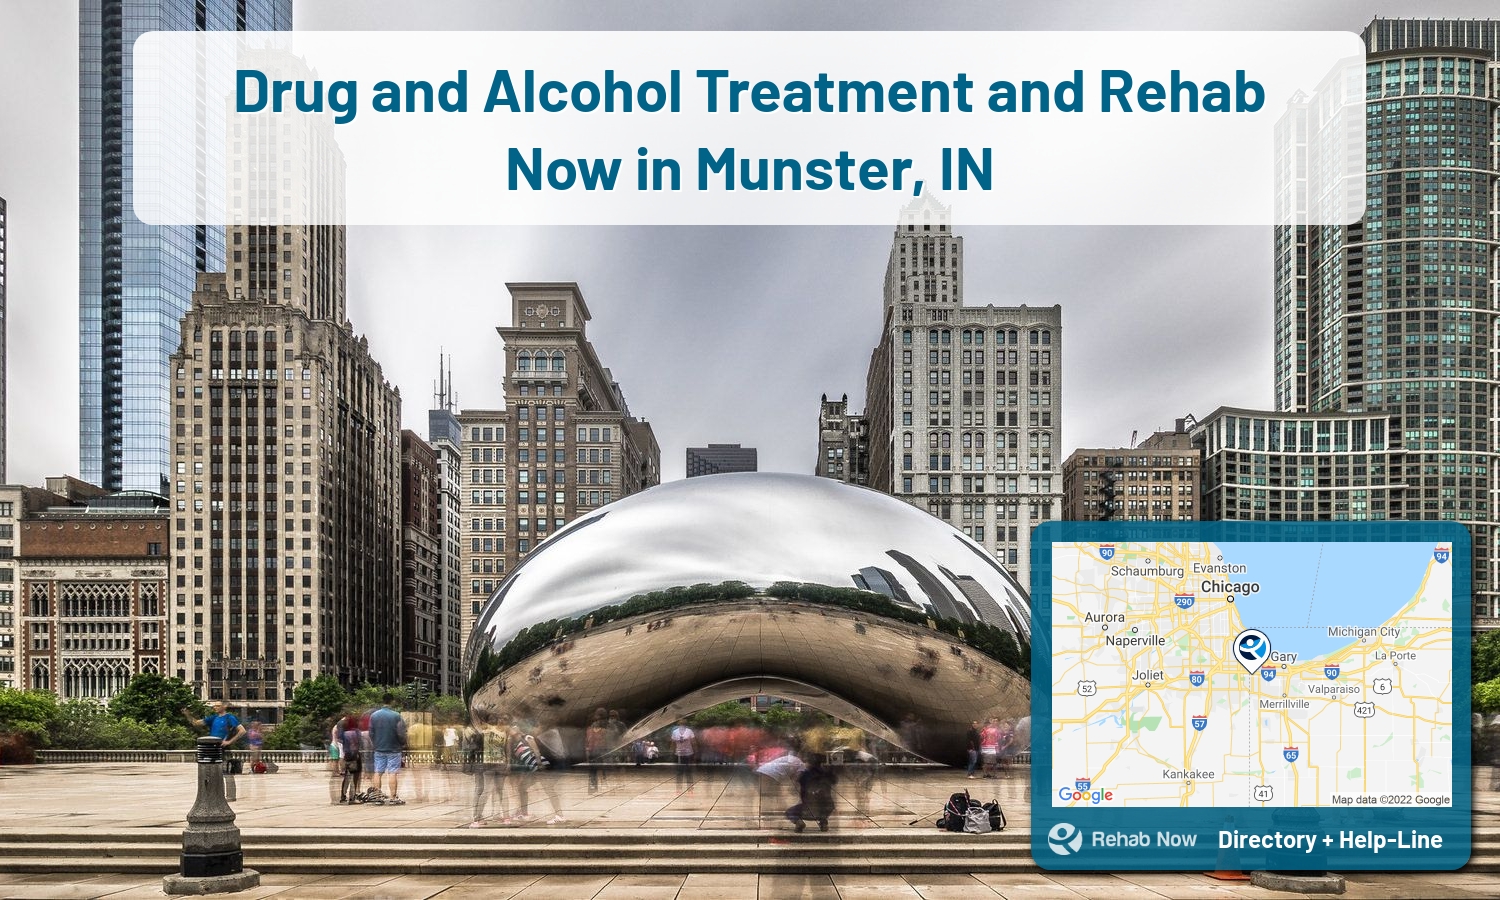 Munster, IN Treatment Centers. Find drug rehab in Munster, Indiana, or detox and treatment programs. Get the right help now!